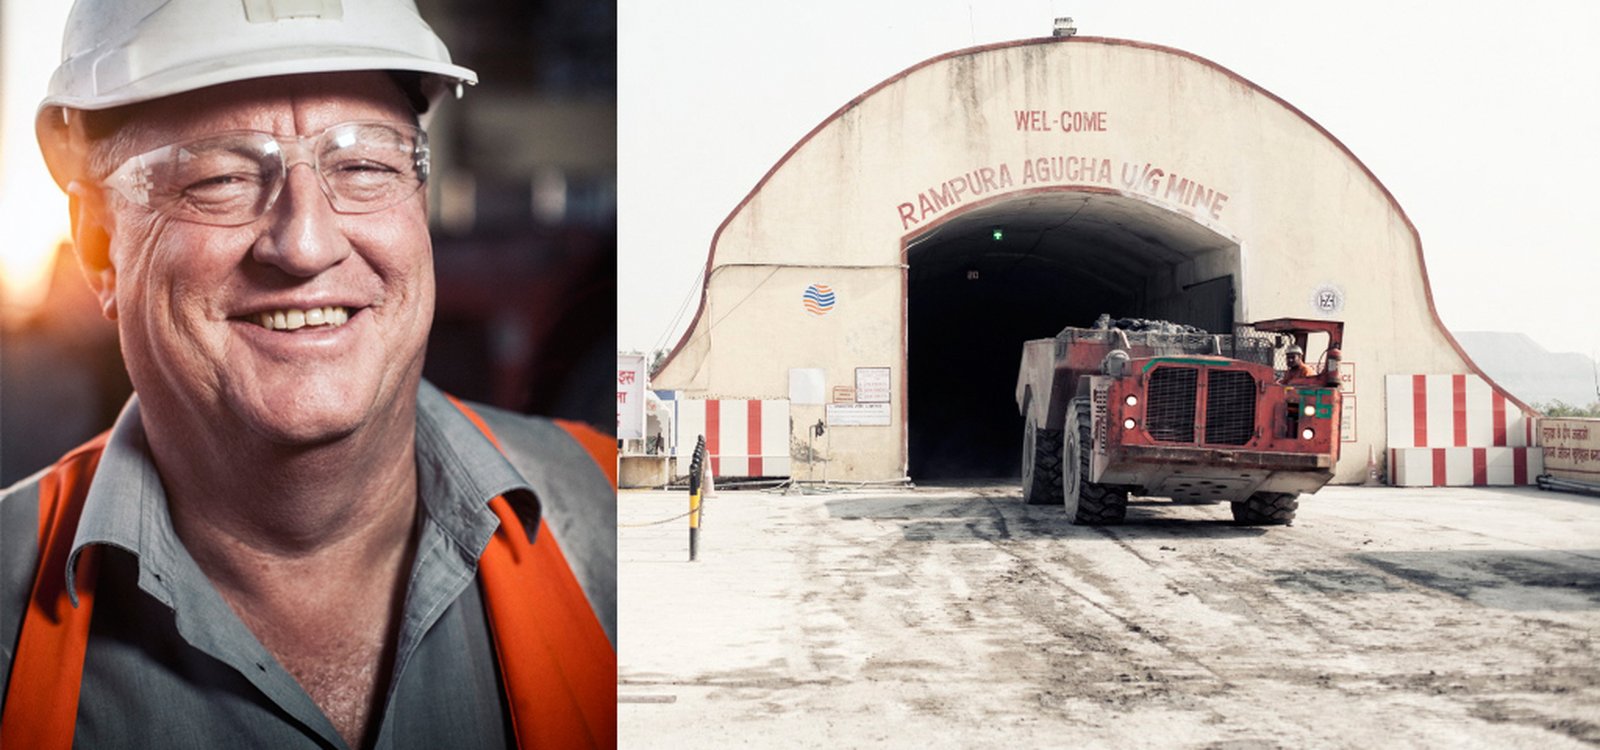 “Sandvik brings the best in safety practices from around the world,” says John Palmer, HZL general engineering manager, Rampura Agucha. 